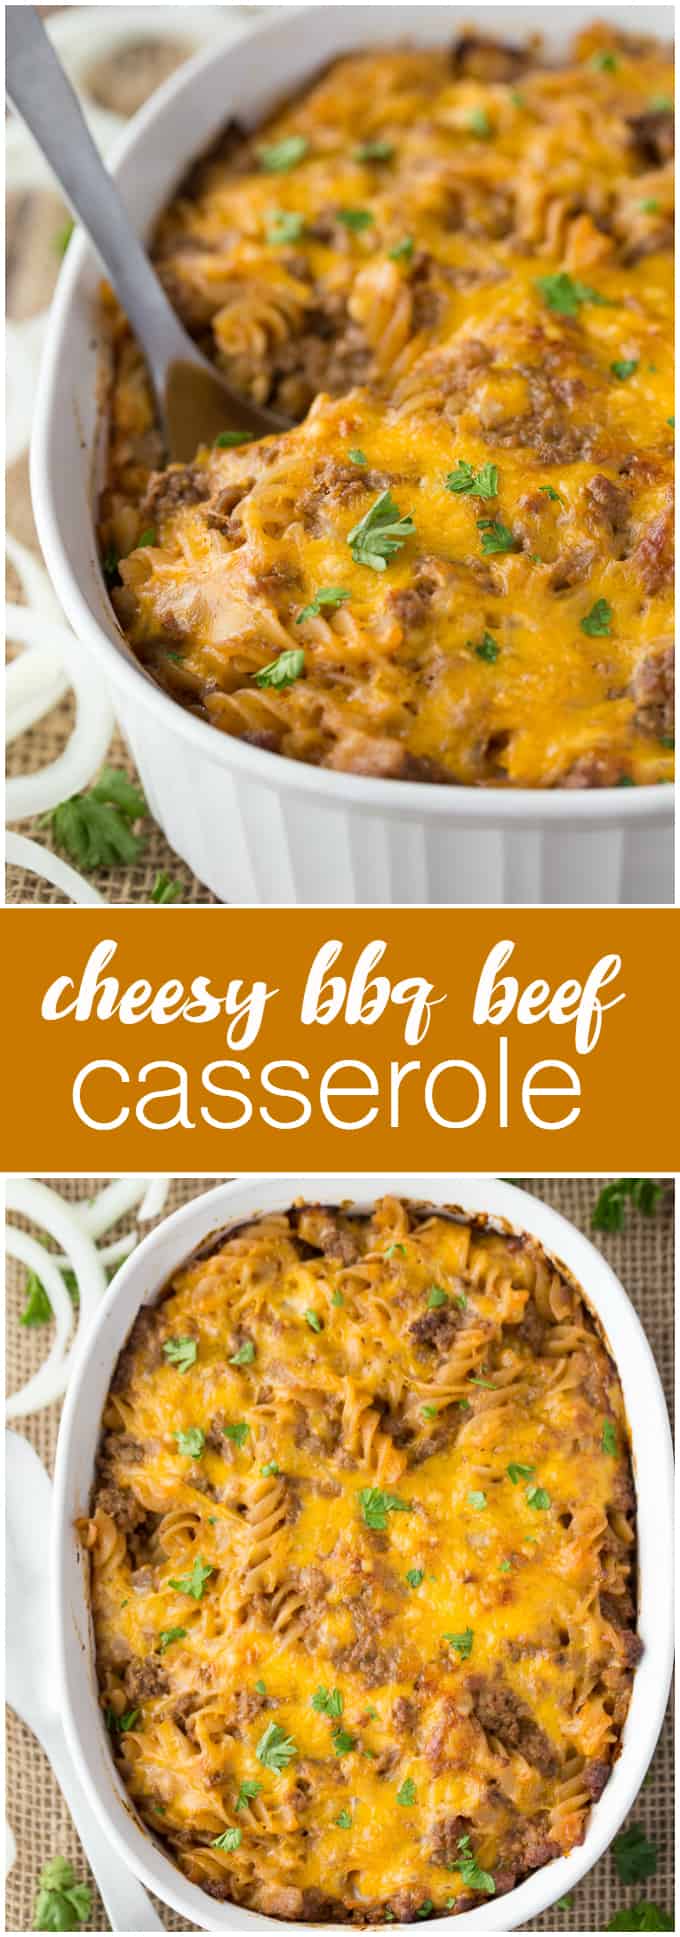 Cheesy BBQ Beef Casserole - Ground beef, cheese and tangy BBQ sauce create a quick, easy and cost-effective family meal that everyone is sure to enjoy. This dish is a great make-ahead meal, and makes a great lunch the next day!